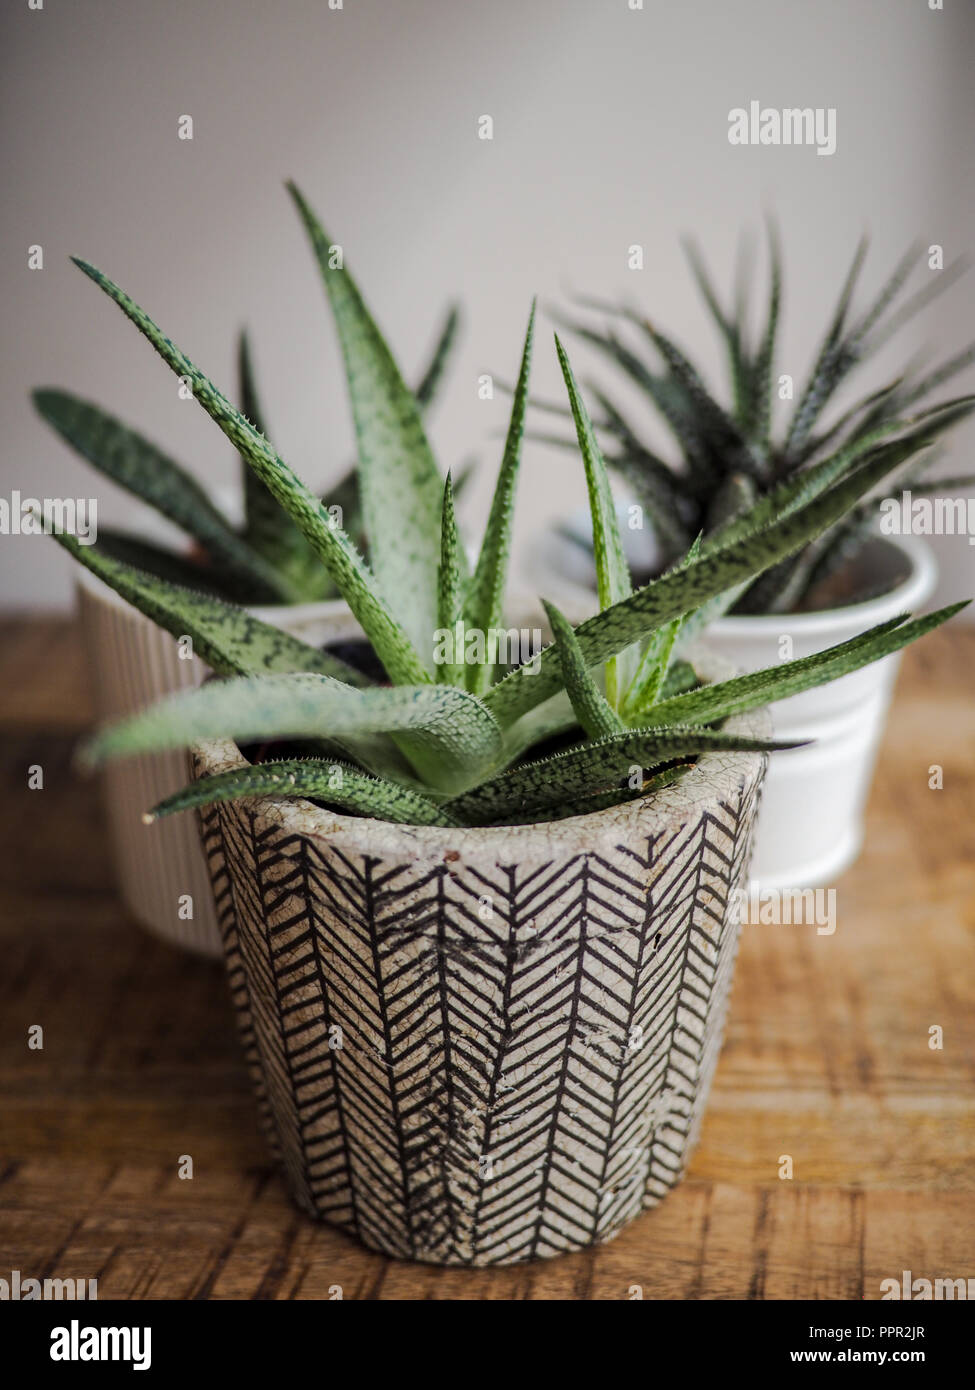 Haworthia limifolia succulent with a baby offshoot in a striped pot standing on a wooden table indoo Stock Photo